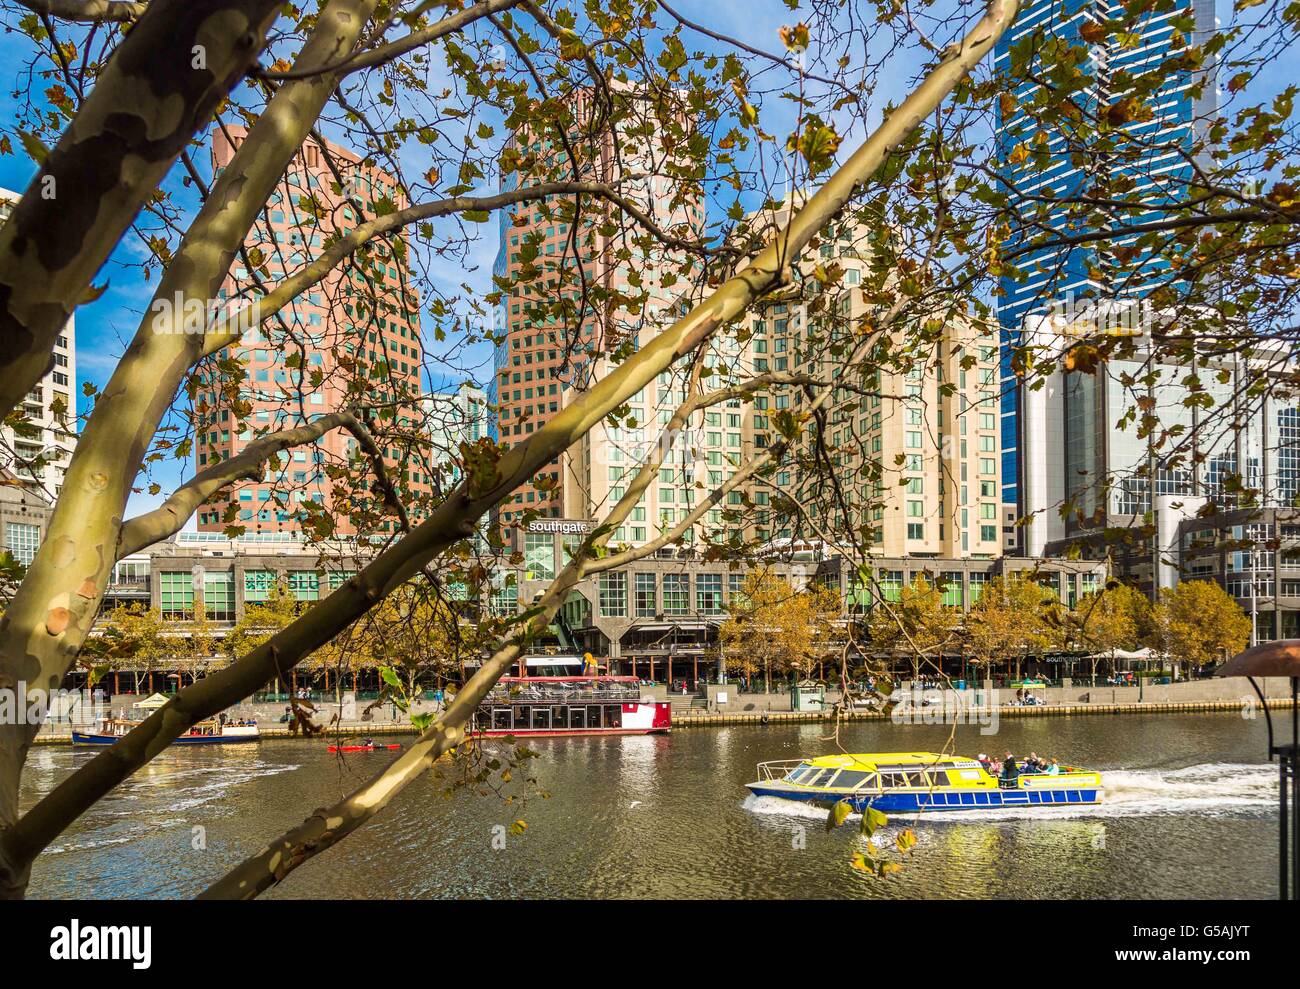 Views of boats, restaurants and shops along the Yarra River in Melbourne, Australia Stock Photo